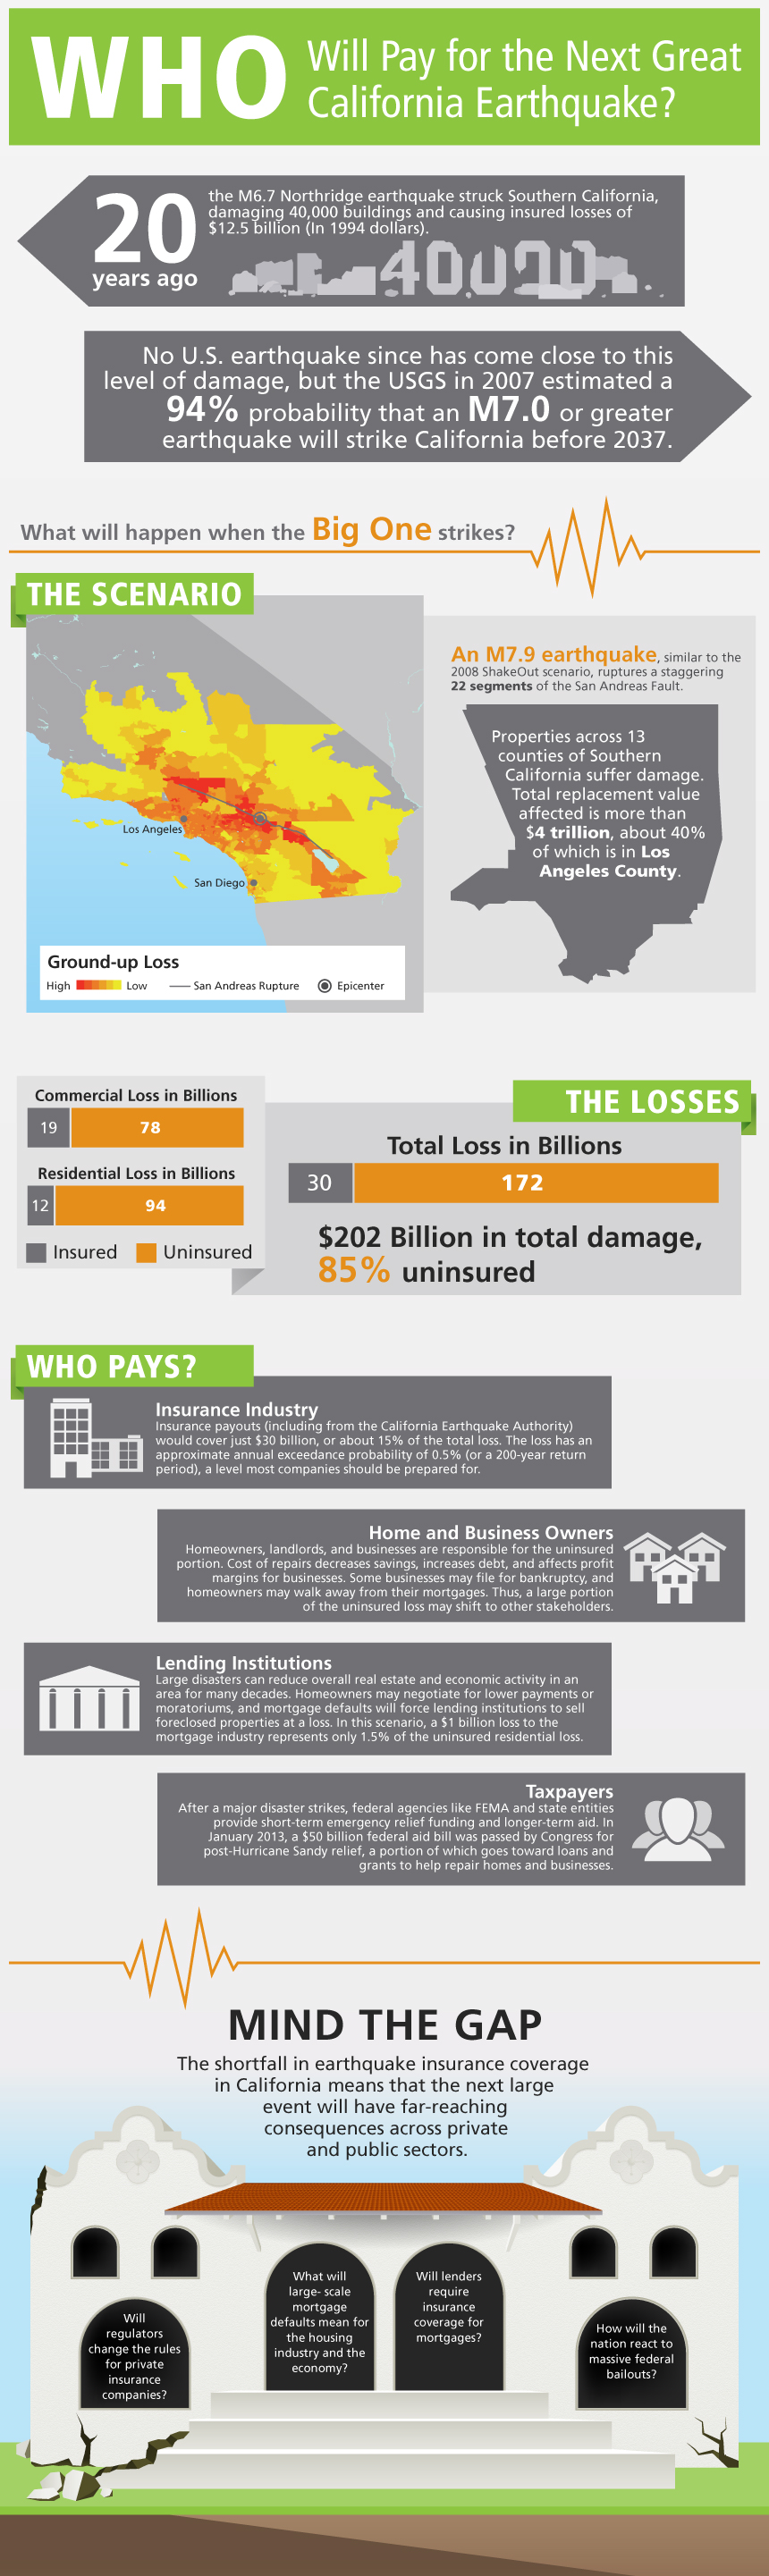 Who Will Pay for the Next Great California Earthquake infographic